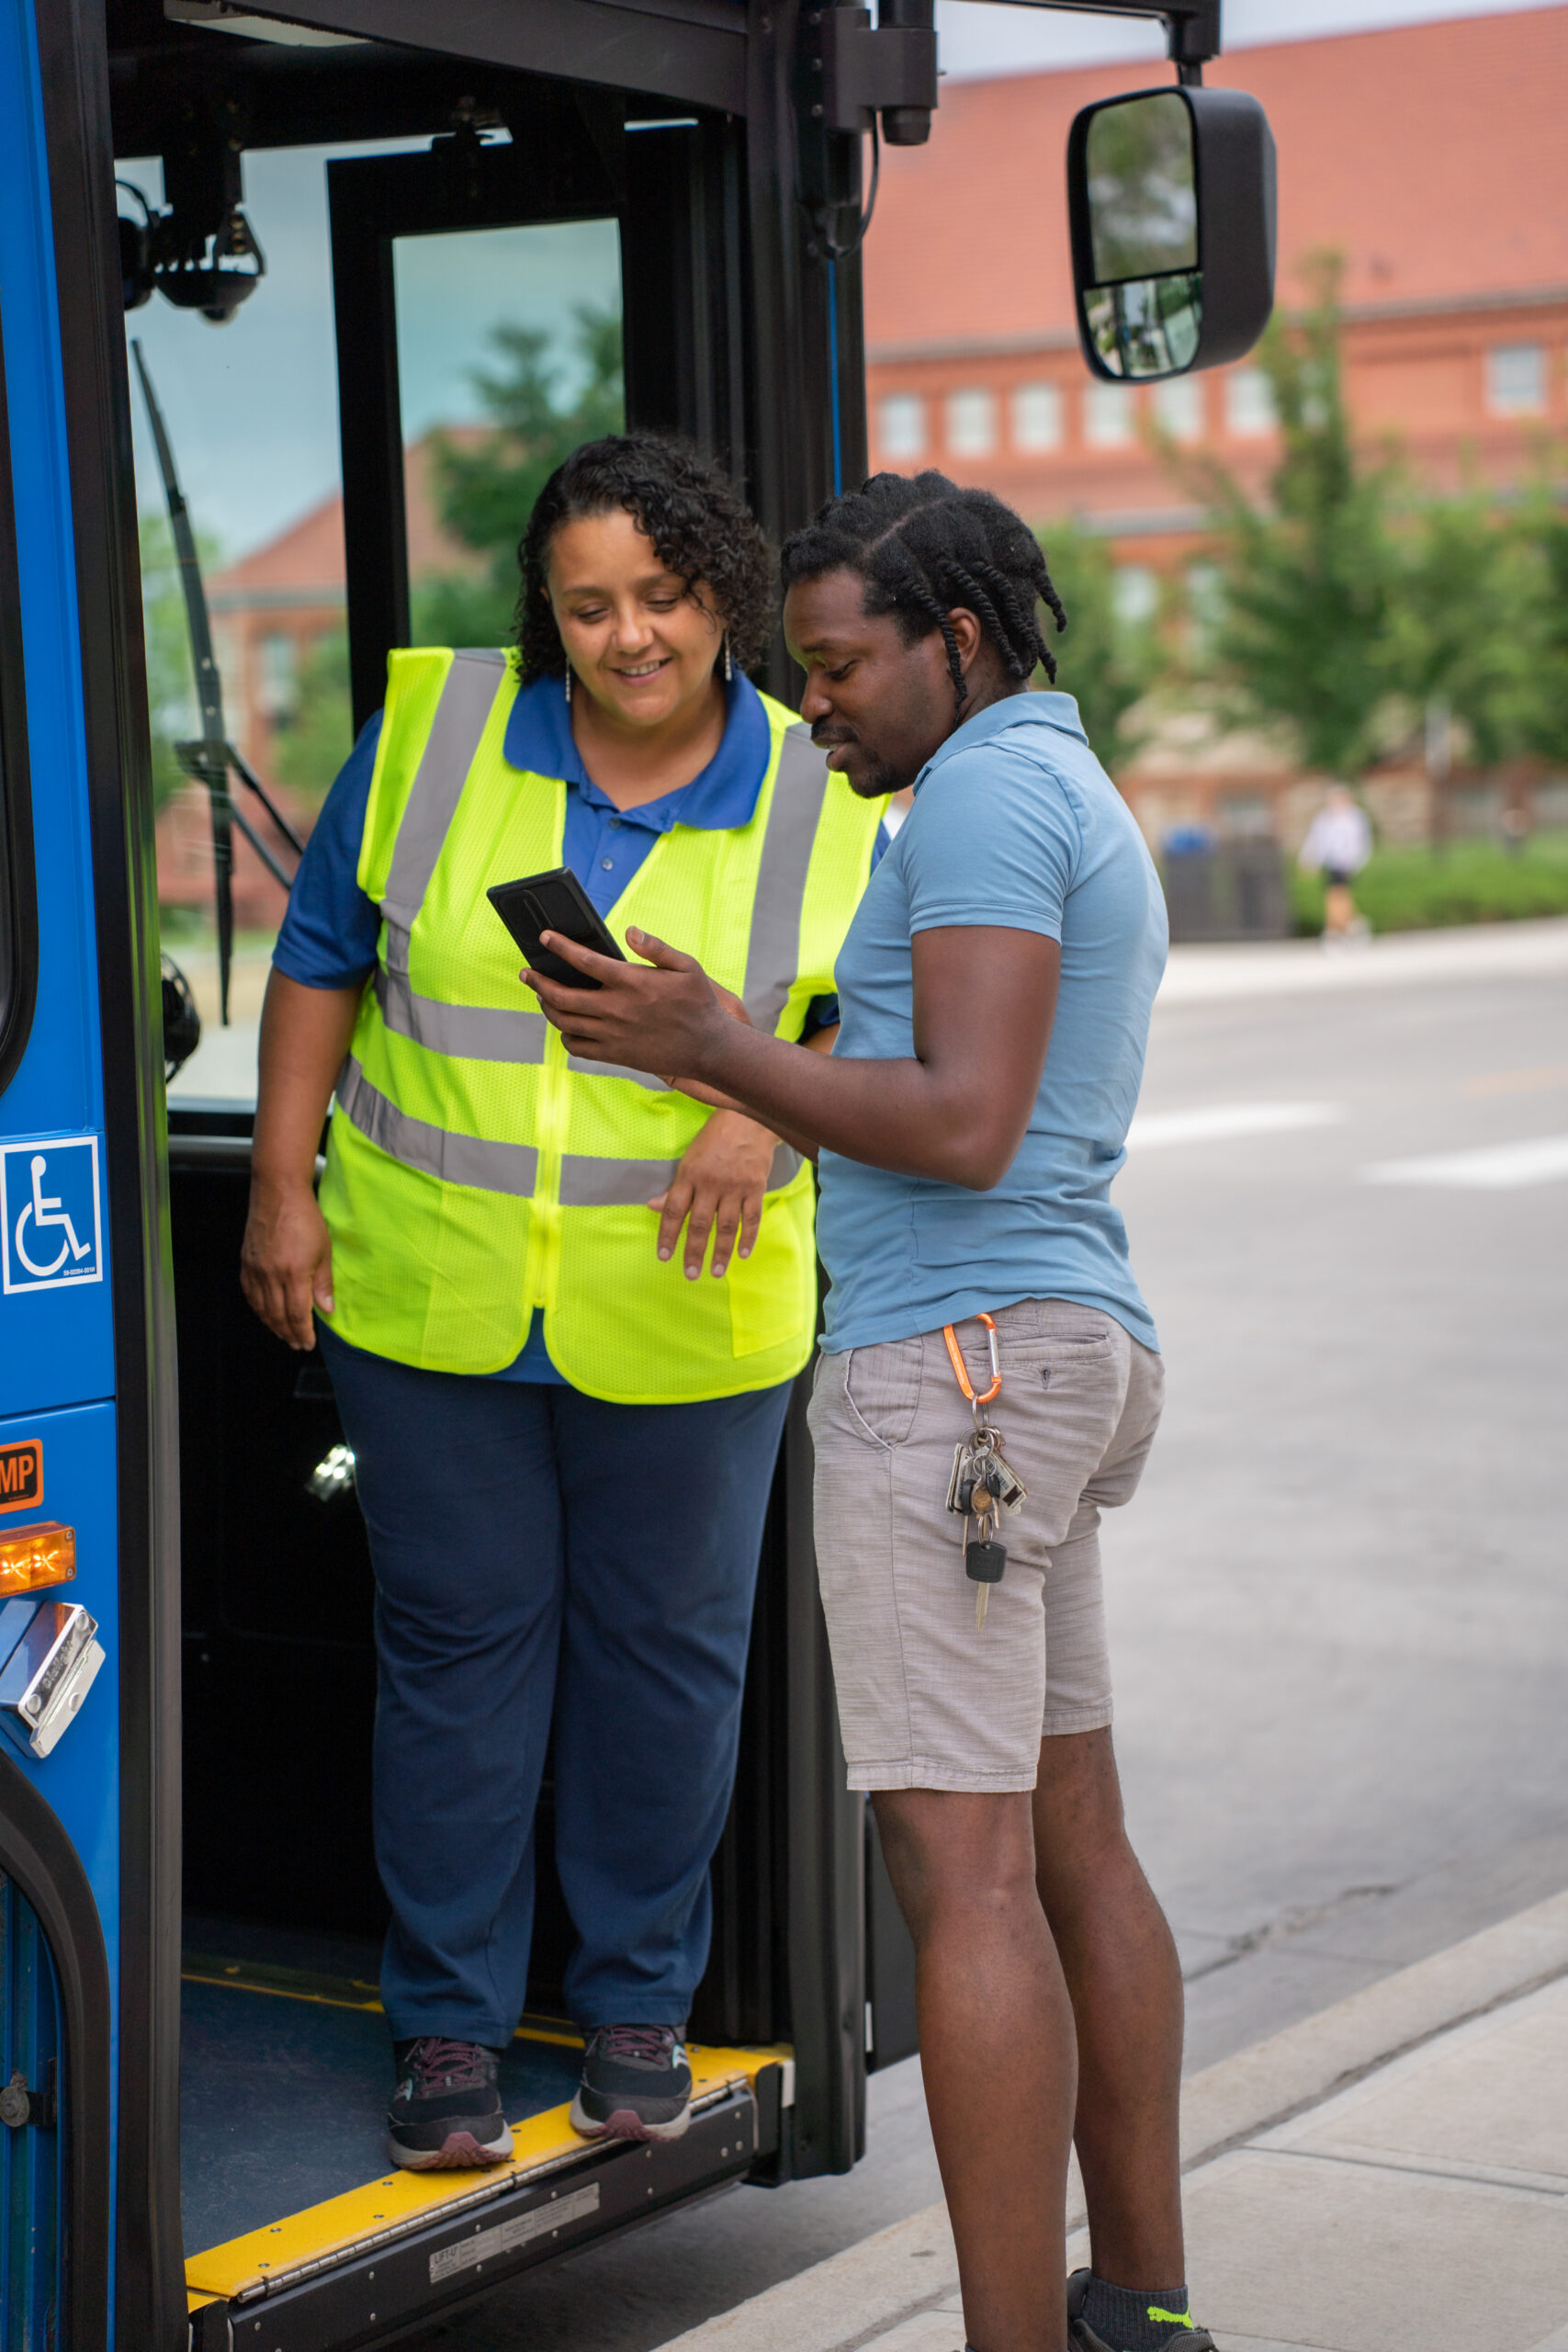 Featured image for “Celebrating National Transit Employee Appreciation Day”